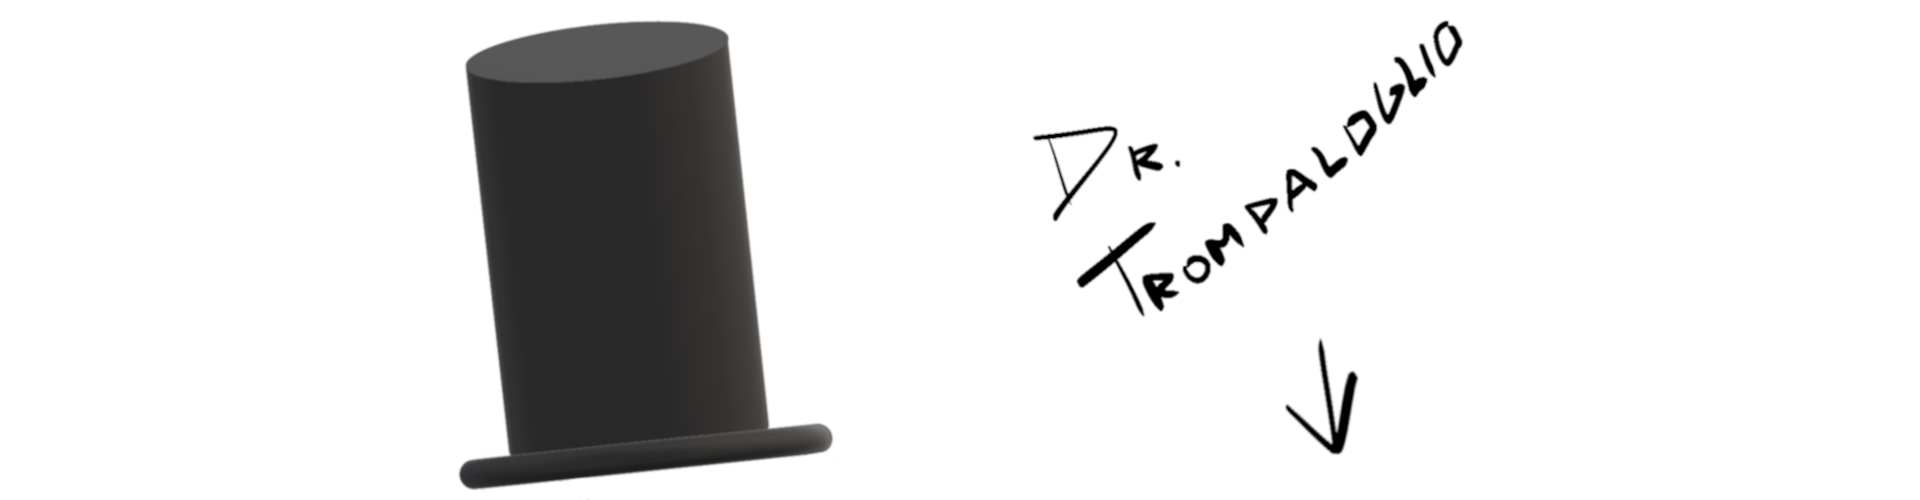 Dr. Trompaloglio and the disorientating case of Feick Thrydee